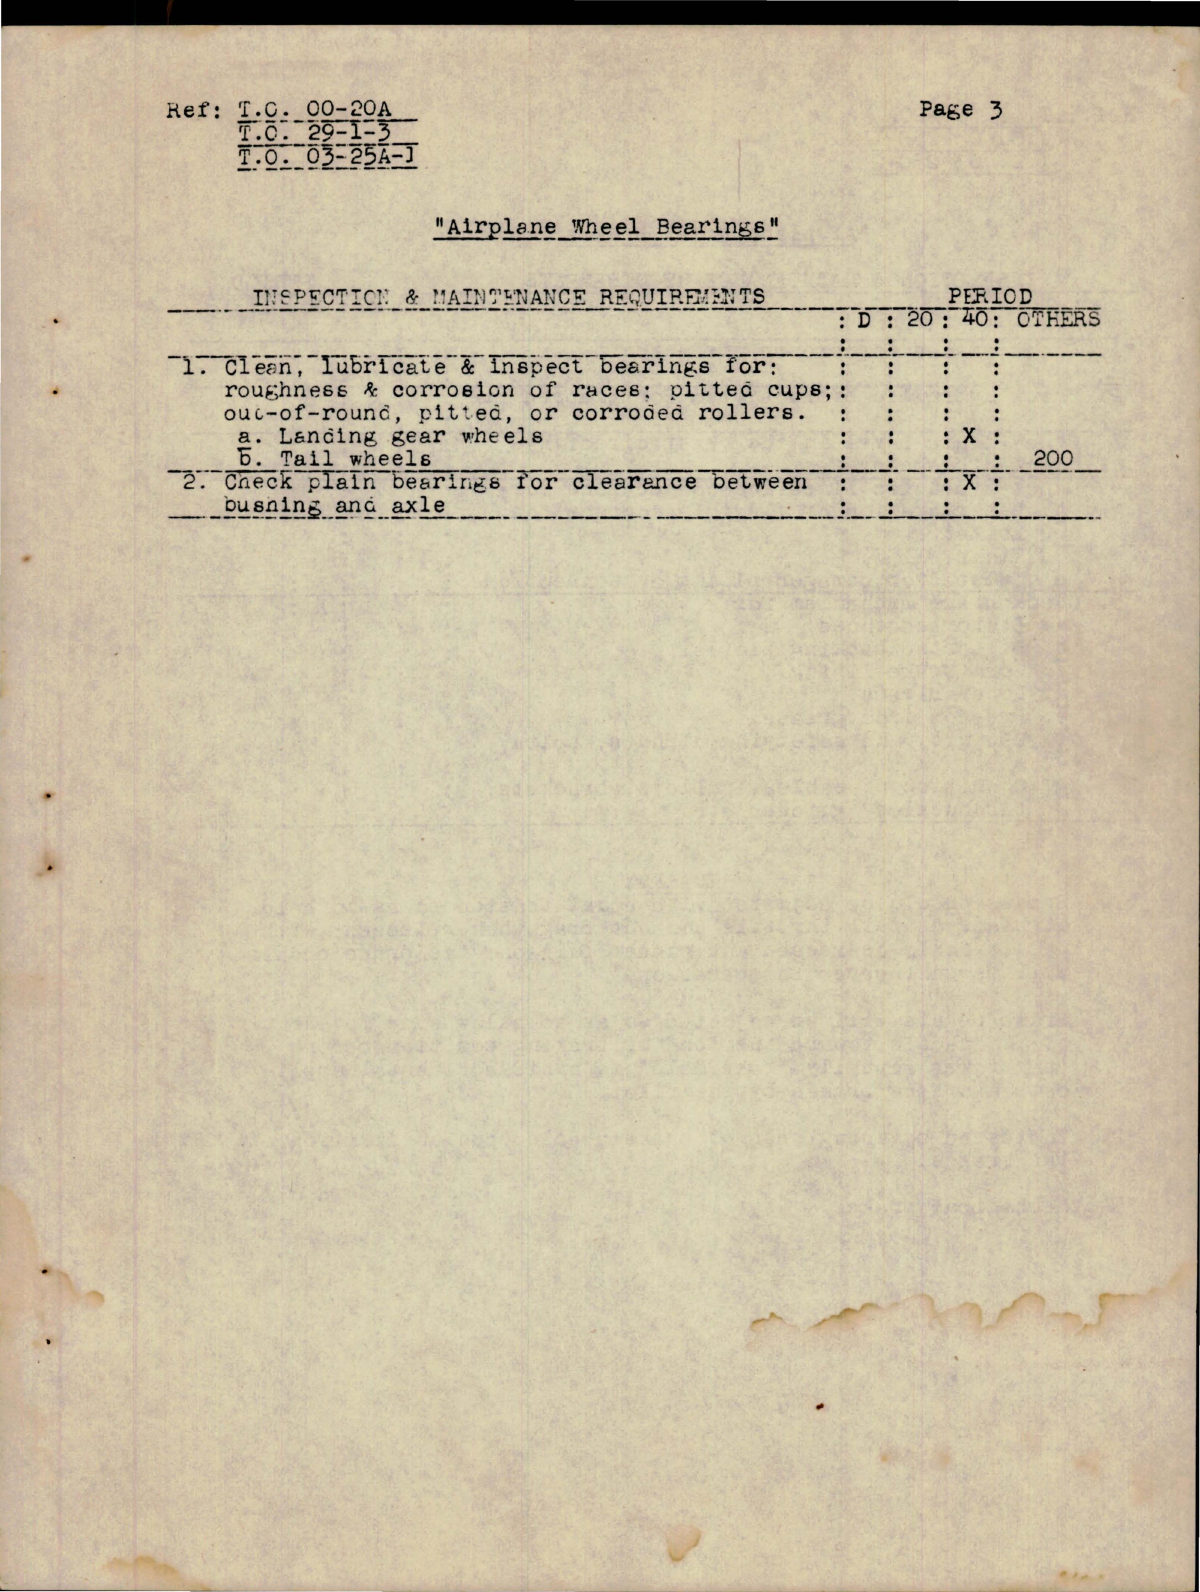 Sample page 5 from AirCorps Library document: Air Corps Technical School - Inspection Guide for Airplane Structures